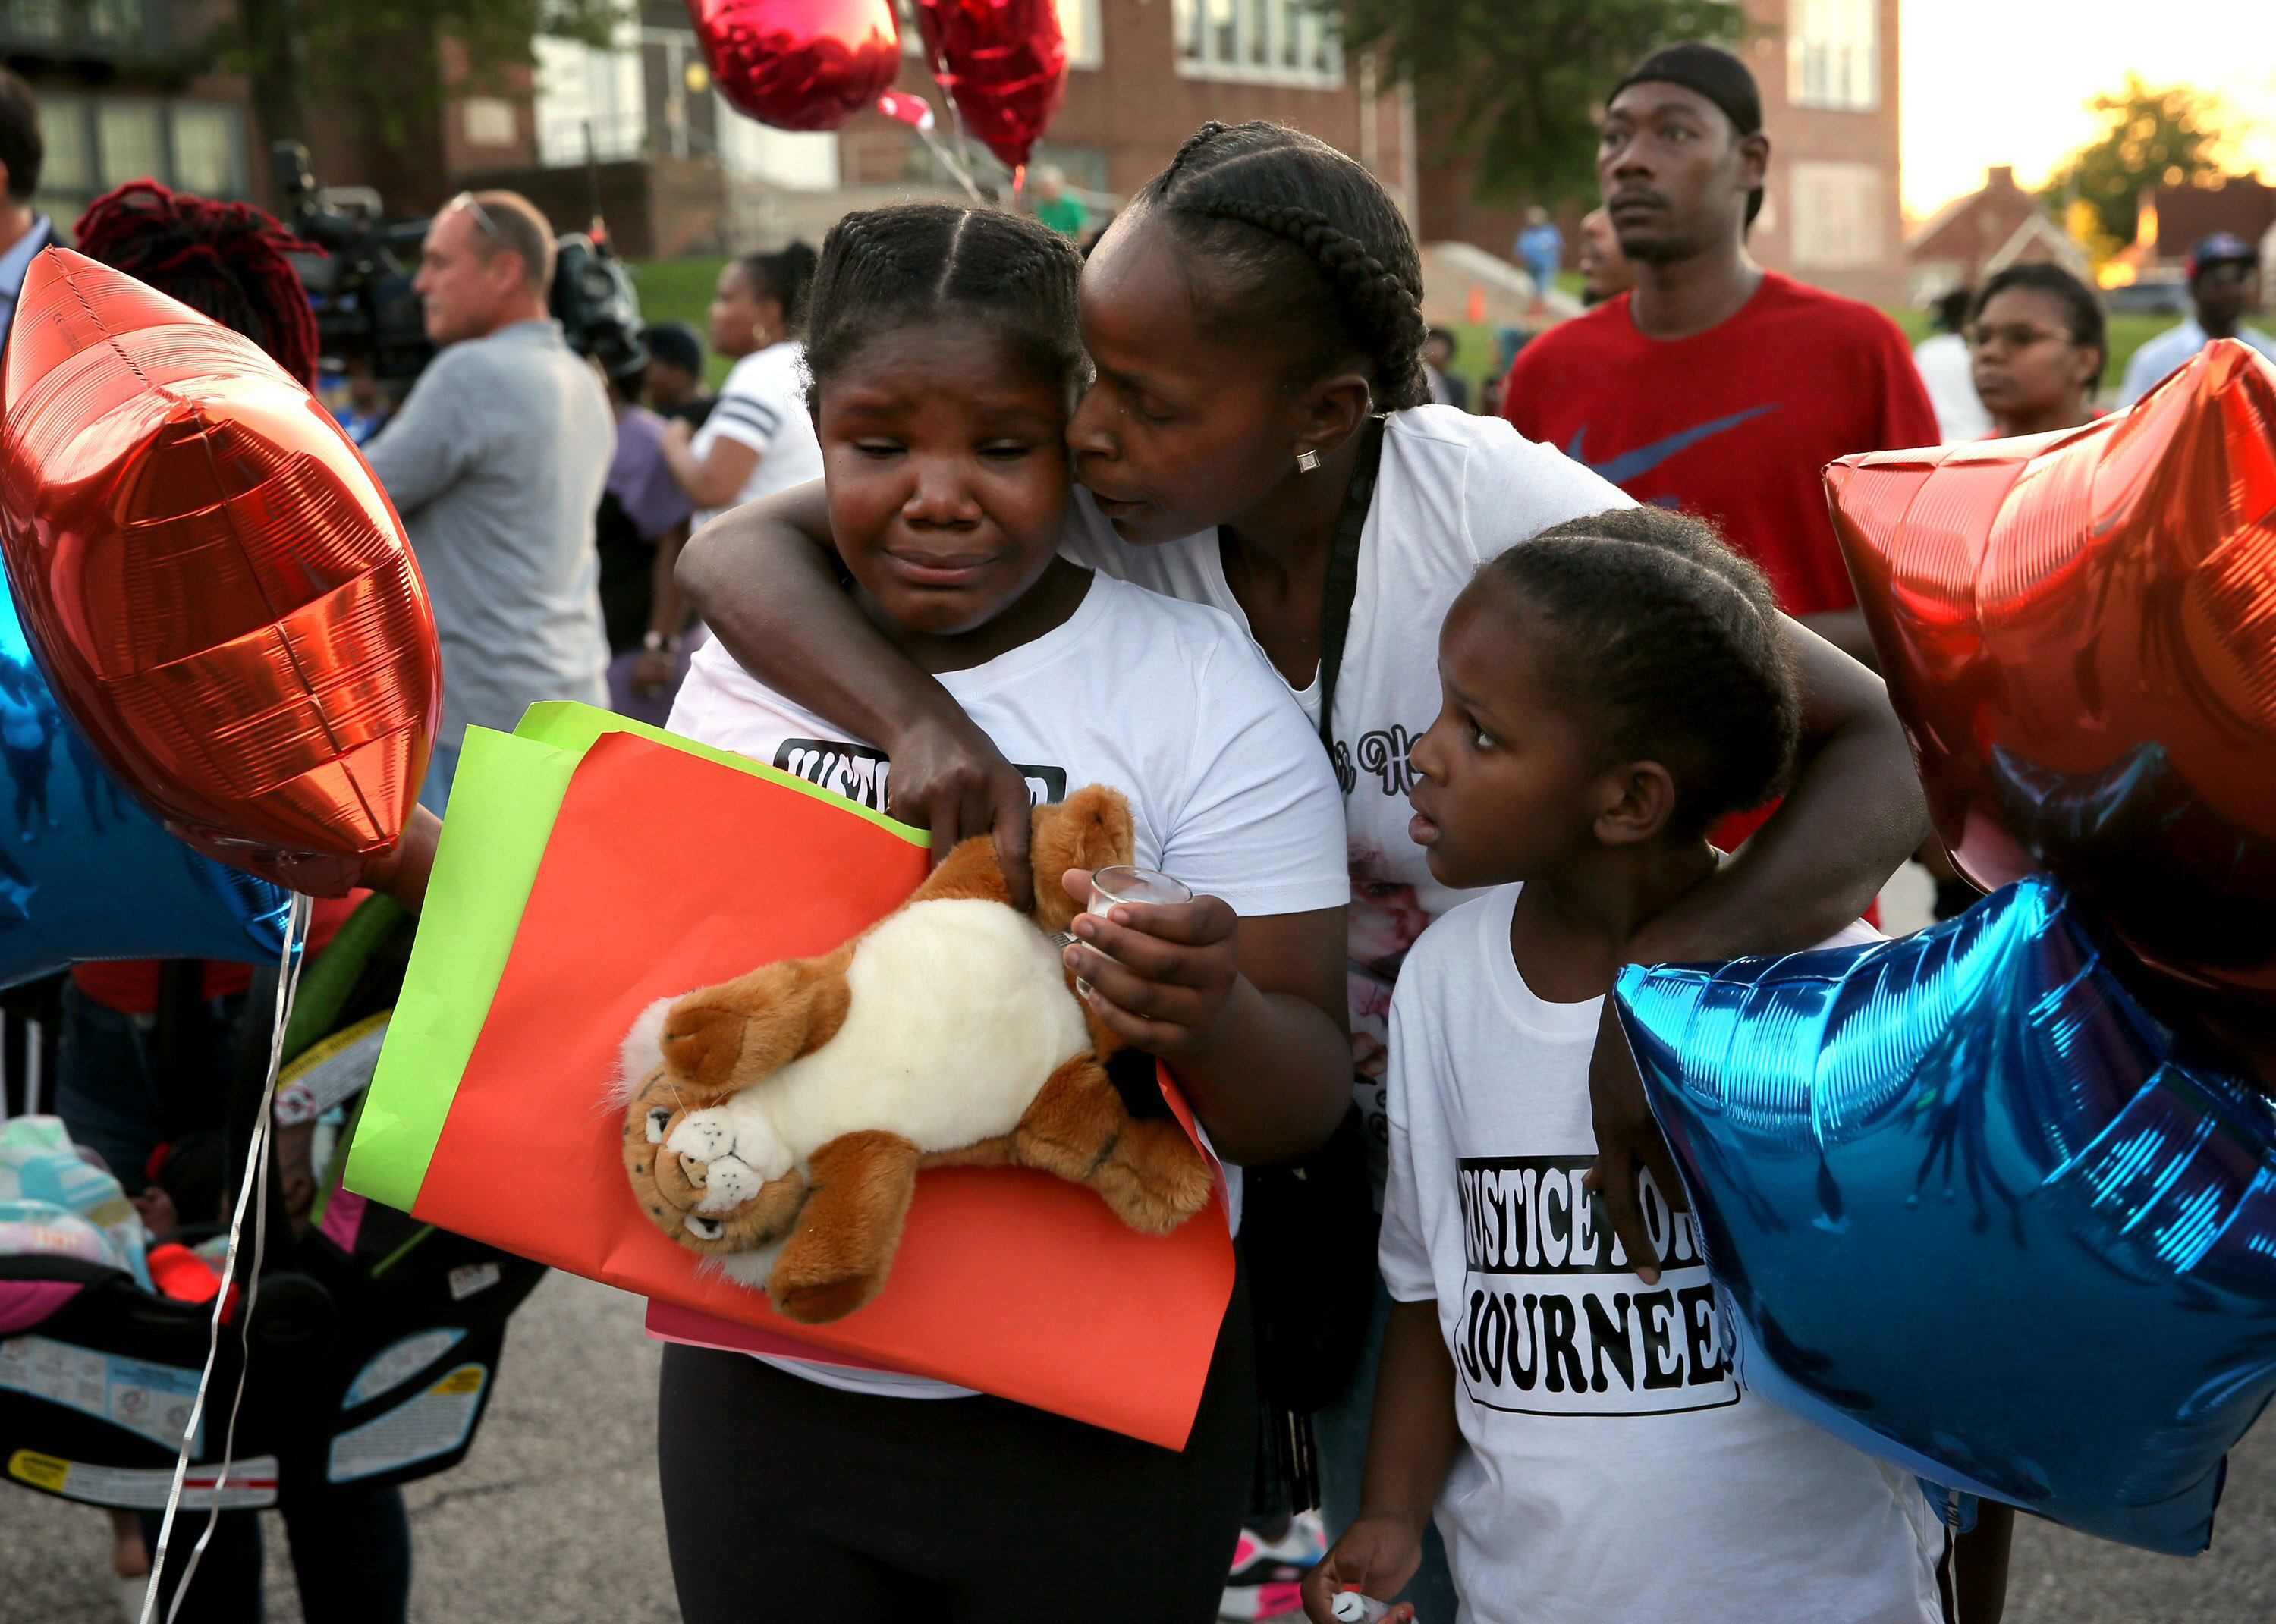 Shardae Edmondson, 11, is consoled by her mother Sharonda Edmondson and sister Zha'lea Thompson, 7, during a vigil for murdered children in St. Louis held at Herzog Elementary School in St. Louis, on Wednesday, Aug. 28, 2019. Shardae and Zha'lea are sisters of 8-year-old Jurnee Thompson who was killed by a stray bullet last Friday night. (David Carson/St. Louis Post-Dispatch via AP) (David Carson—AP)